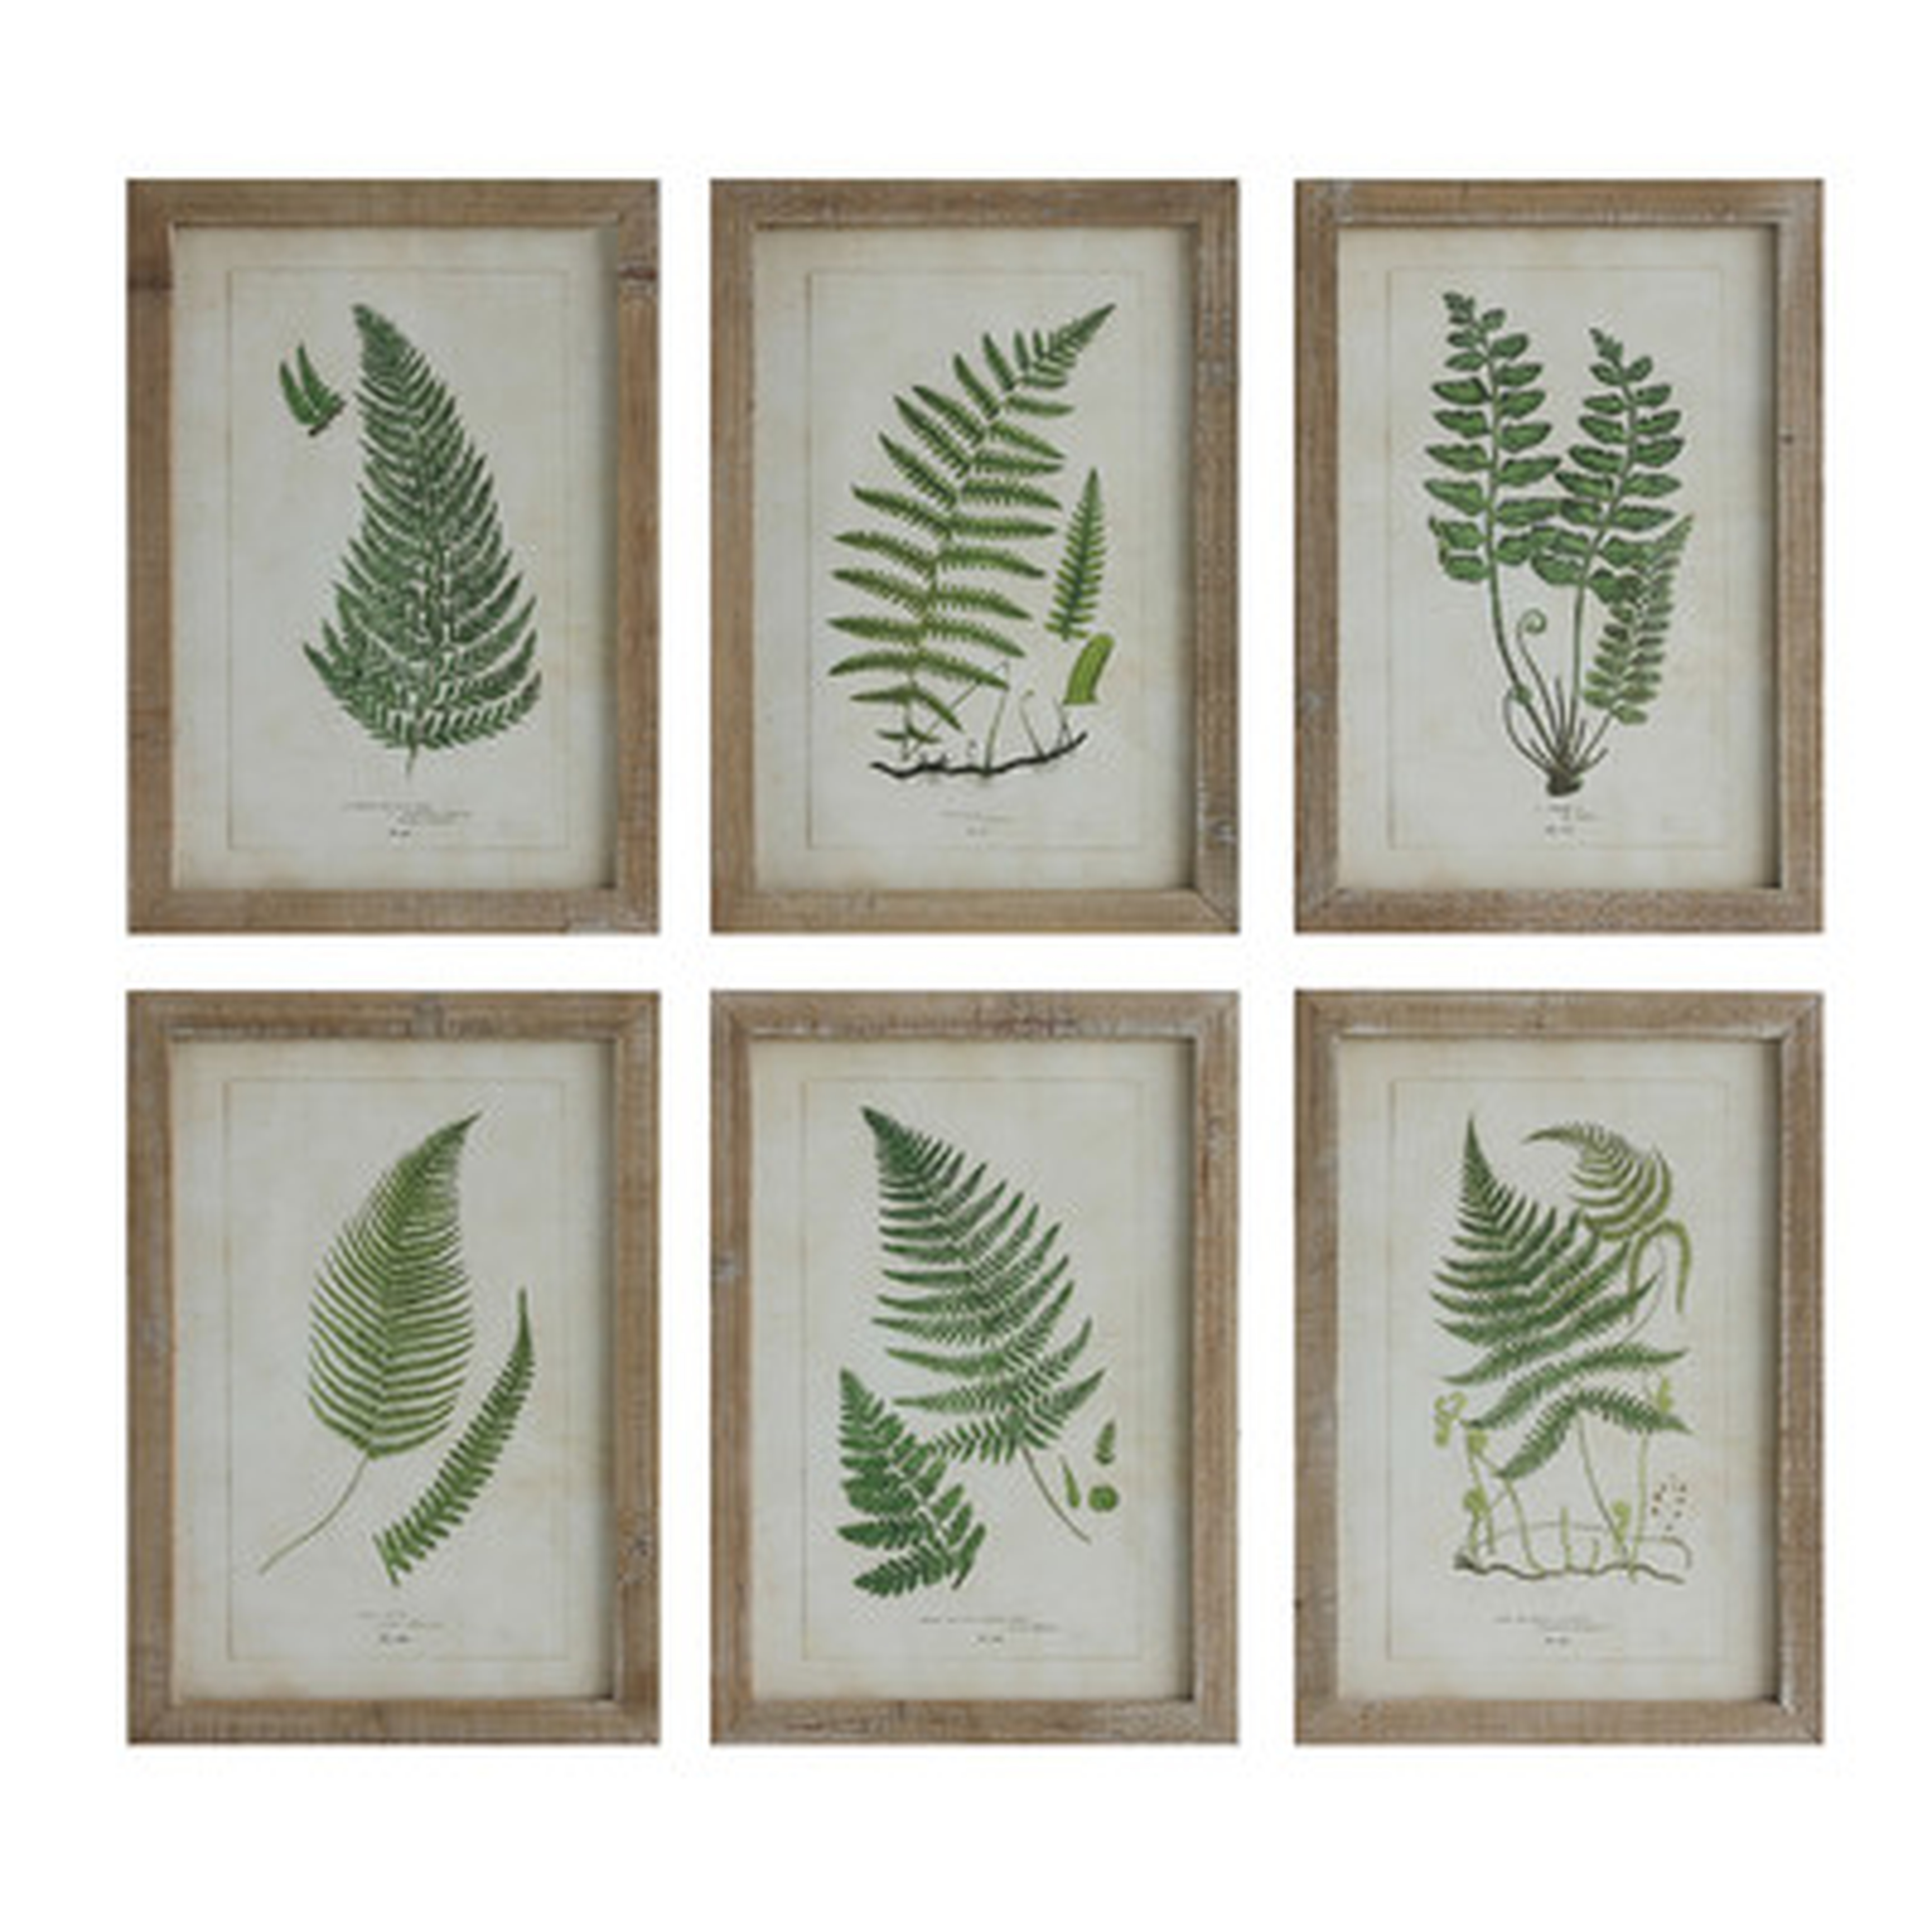 Redvers Wood Framed Wall Decor with Fern Fronds - 6 Piece Picture Frame Print Set on Wood - Birch Lane